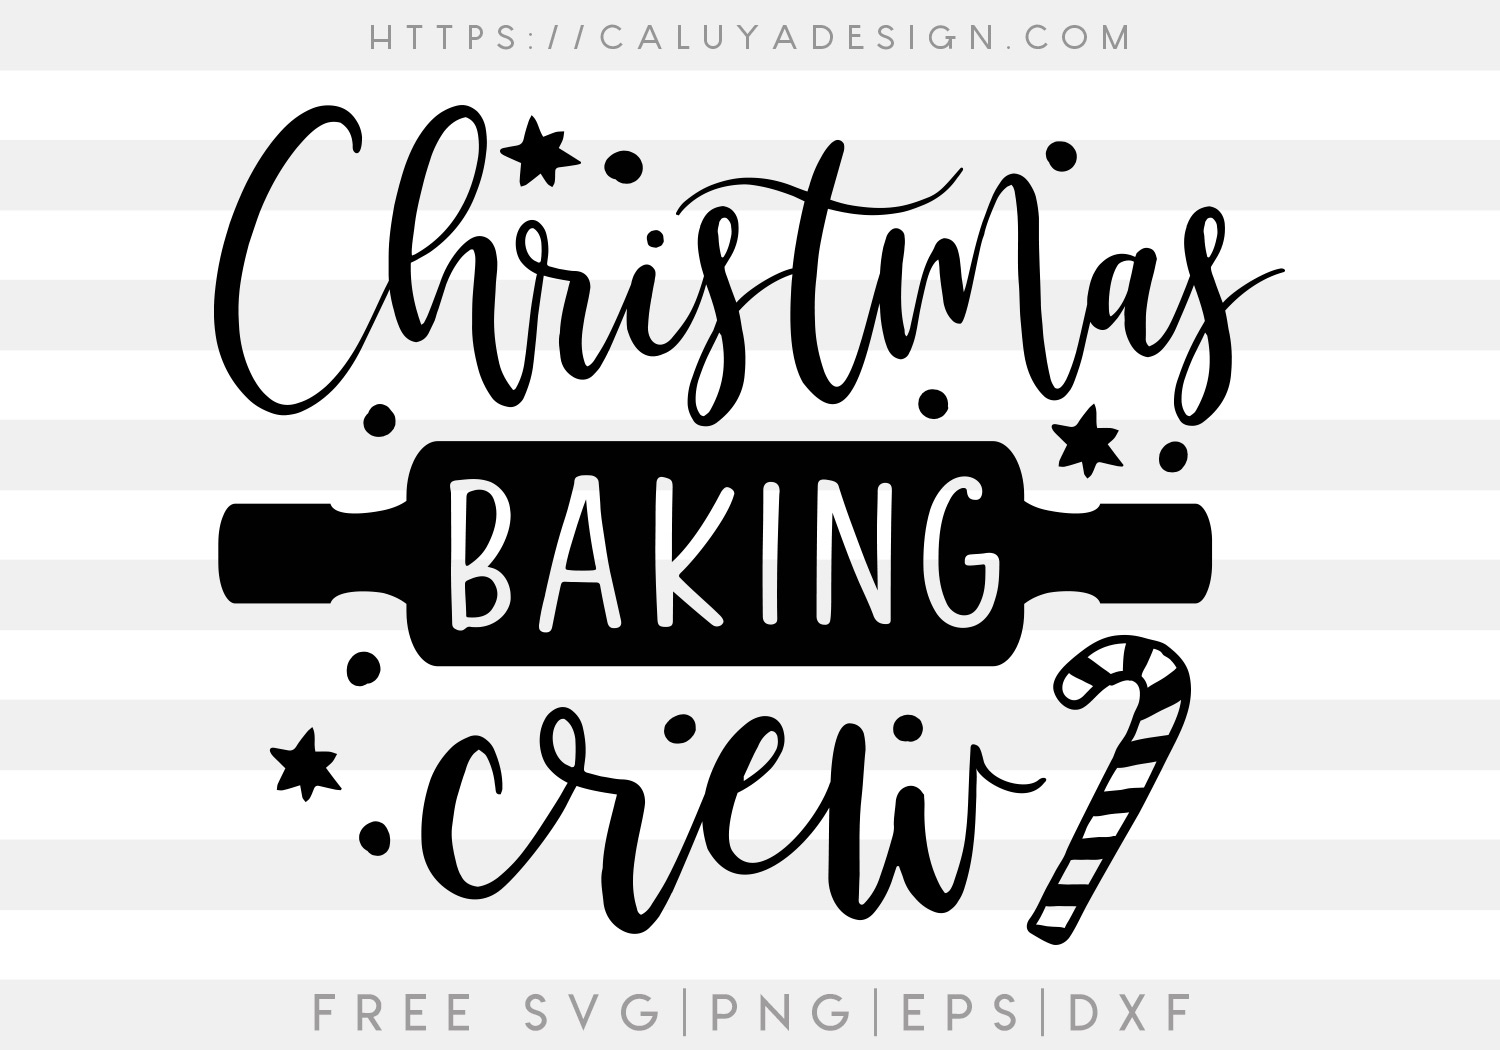 Download Free Christmas Baking Crew Svg Png Eps Dxf By Caluya Design